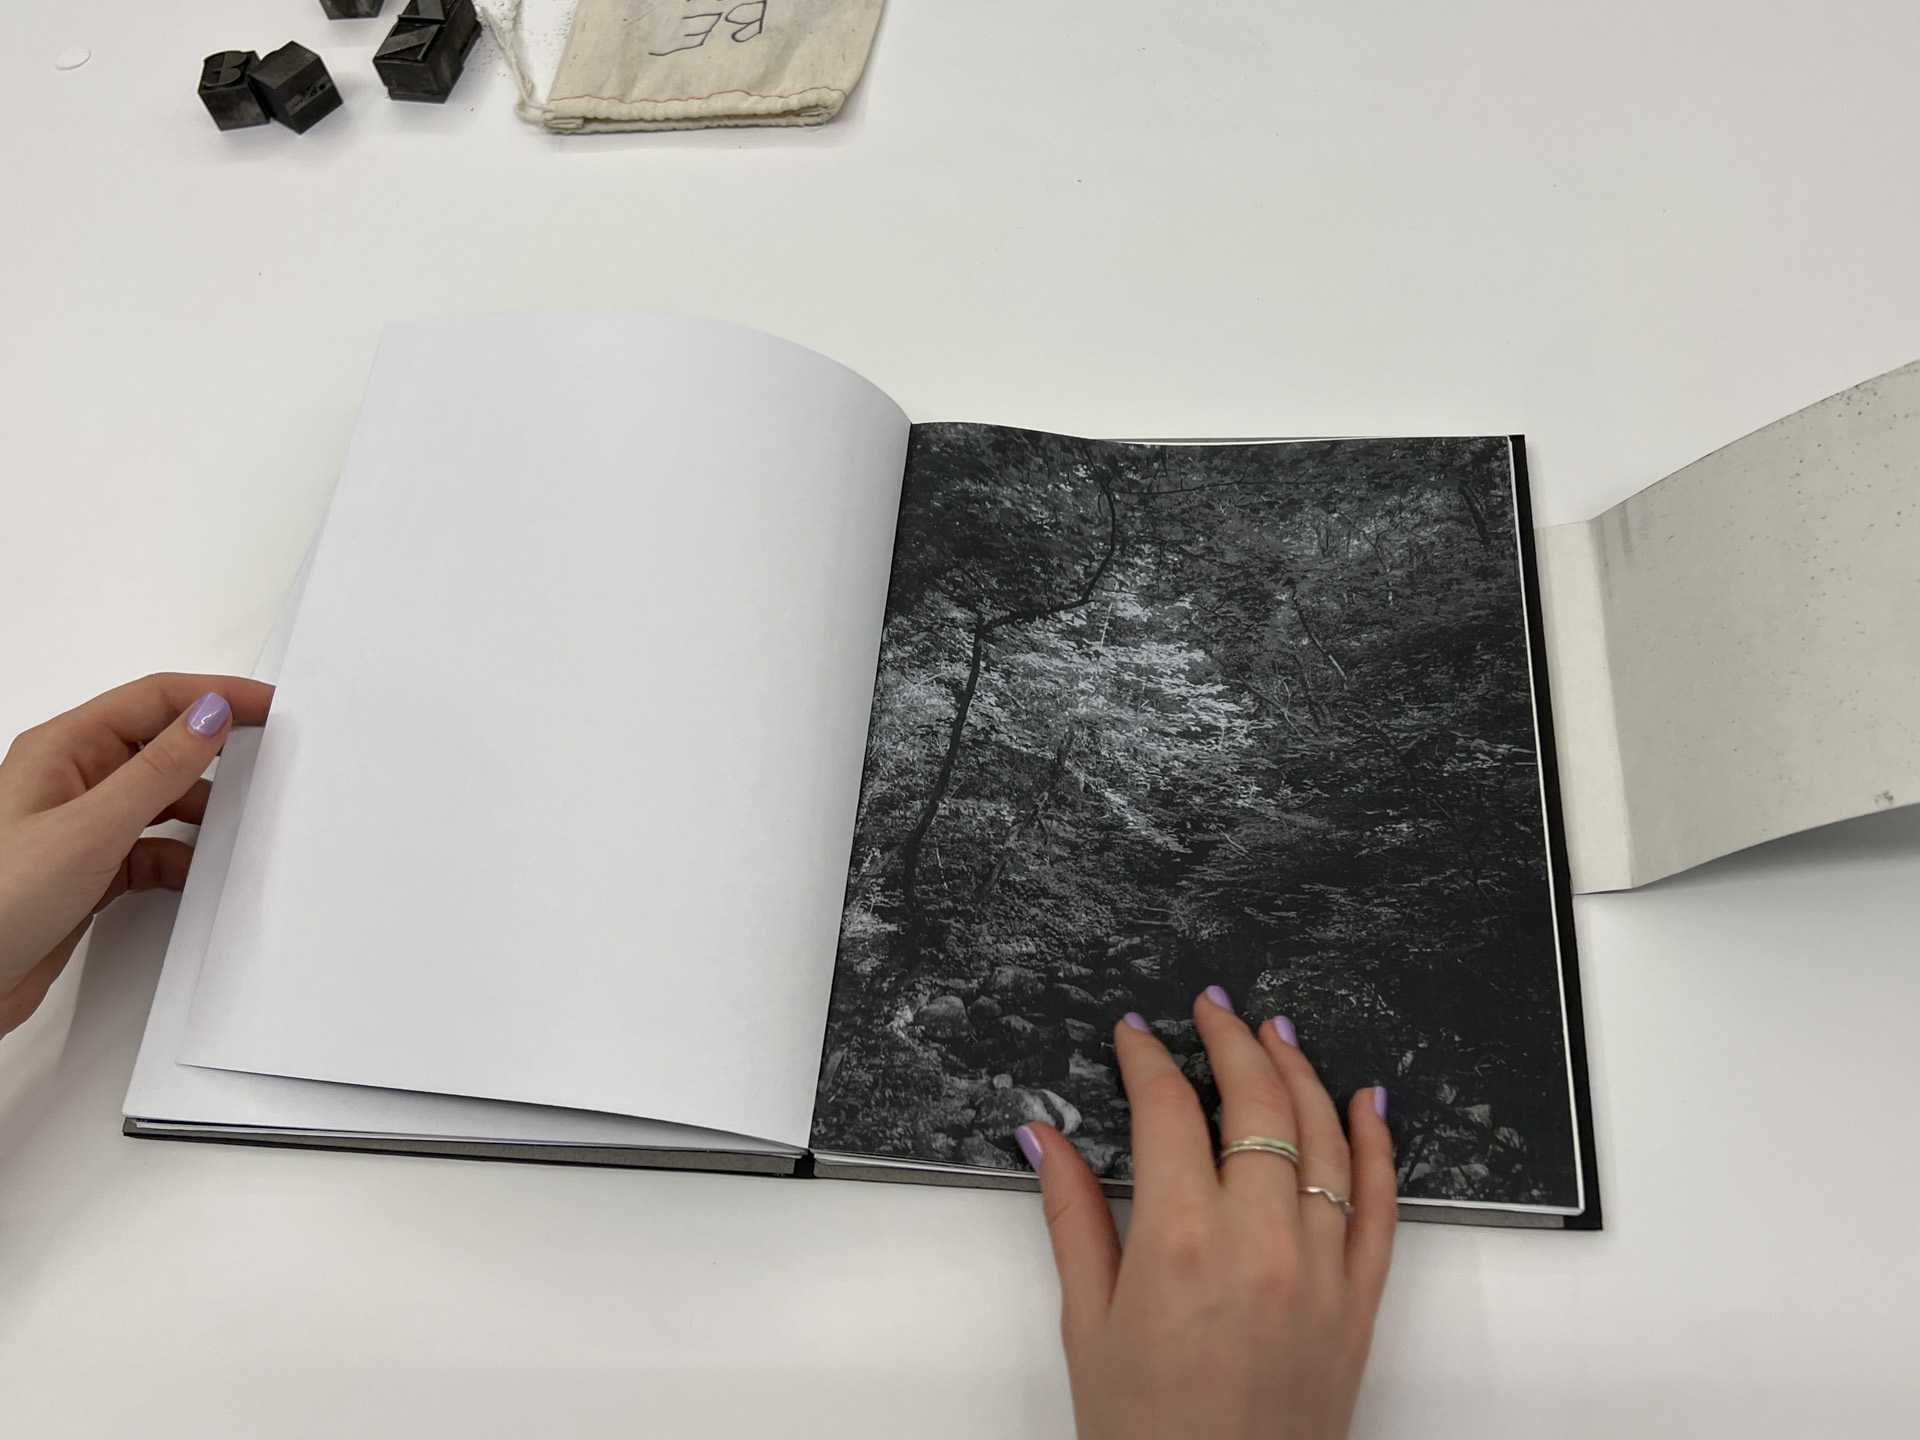 book opened to black and white landscape